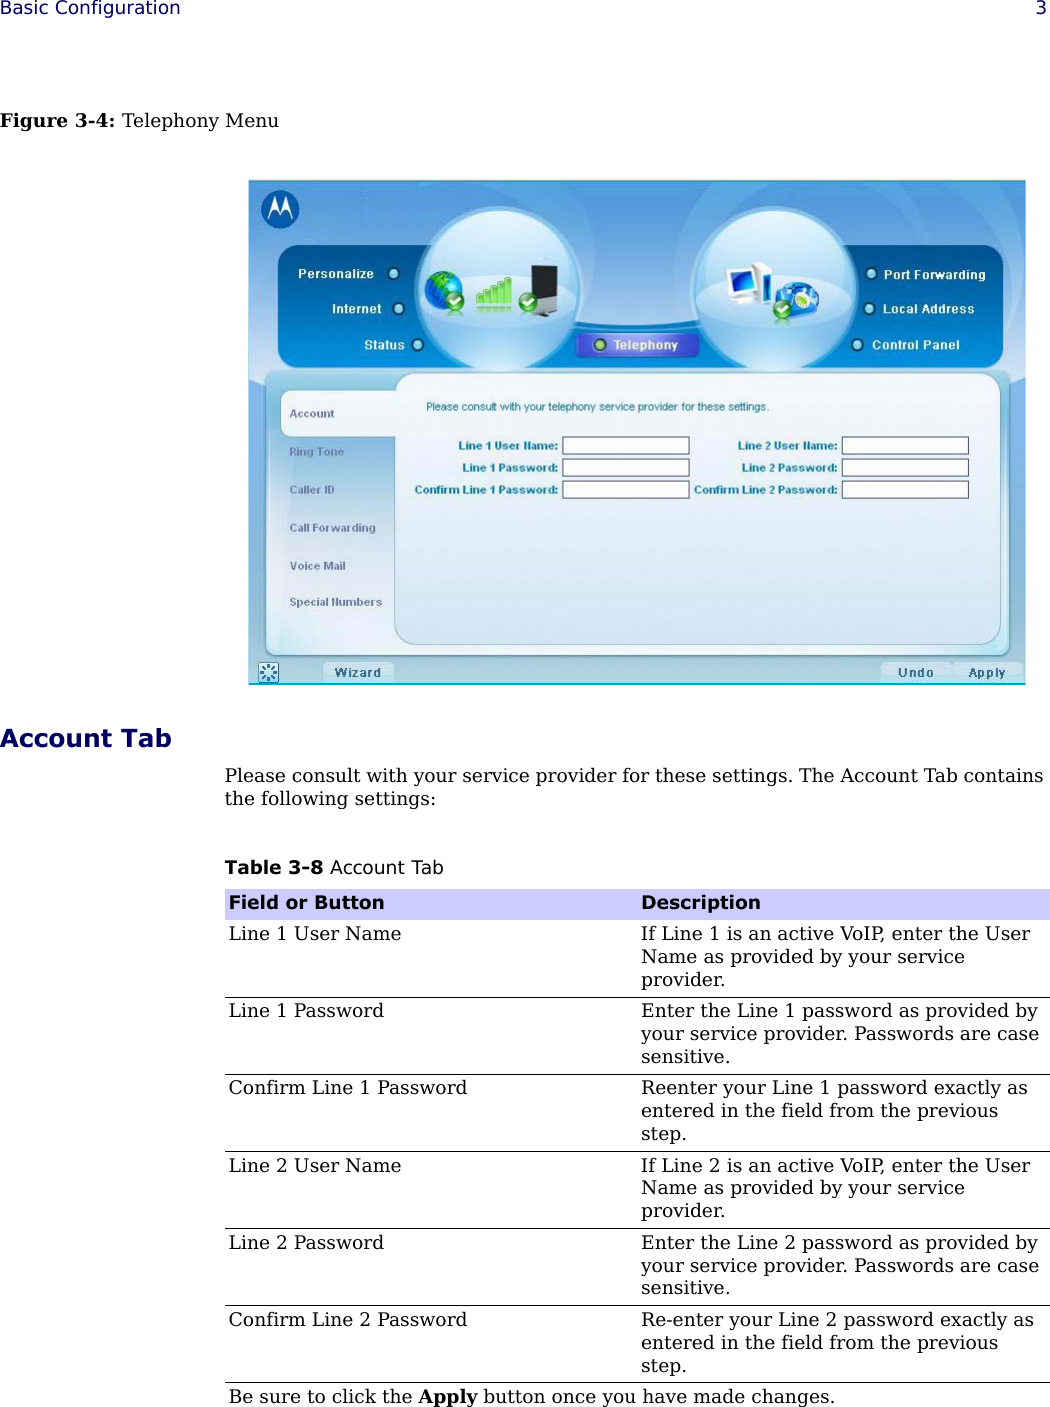  Basic Configuration 3Figure 3-4: Telephony MenuAccount TabPlease consult with your service provider for these settings. The Account Tab contains the following settings:Table 3-8 Account TabField or Button DescriptionLine 1 User Name If Line 1 is an active VoIP, enter the User Name as provided by your service provider.Line 1 Password Enter the Line 1 password as provided by your service provider. Passwords are case sensitive.Confirm Line 1 Password Reenter your Line 1 password exactly as entered in the field from the previous step.Line 2 User Name If Line 2 is an active VoIP, enter the User Name as provided by your service provider.Line 2 Password Enter the Line 2 password as provided by your service provider. Passwords are case sensitive.Confirm Line 2 Password Re-enter your Line 2 password exactly as entered in the field from the previous step.Be sure to click the Apply button once you have made changes.